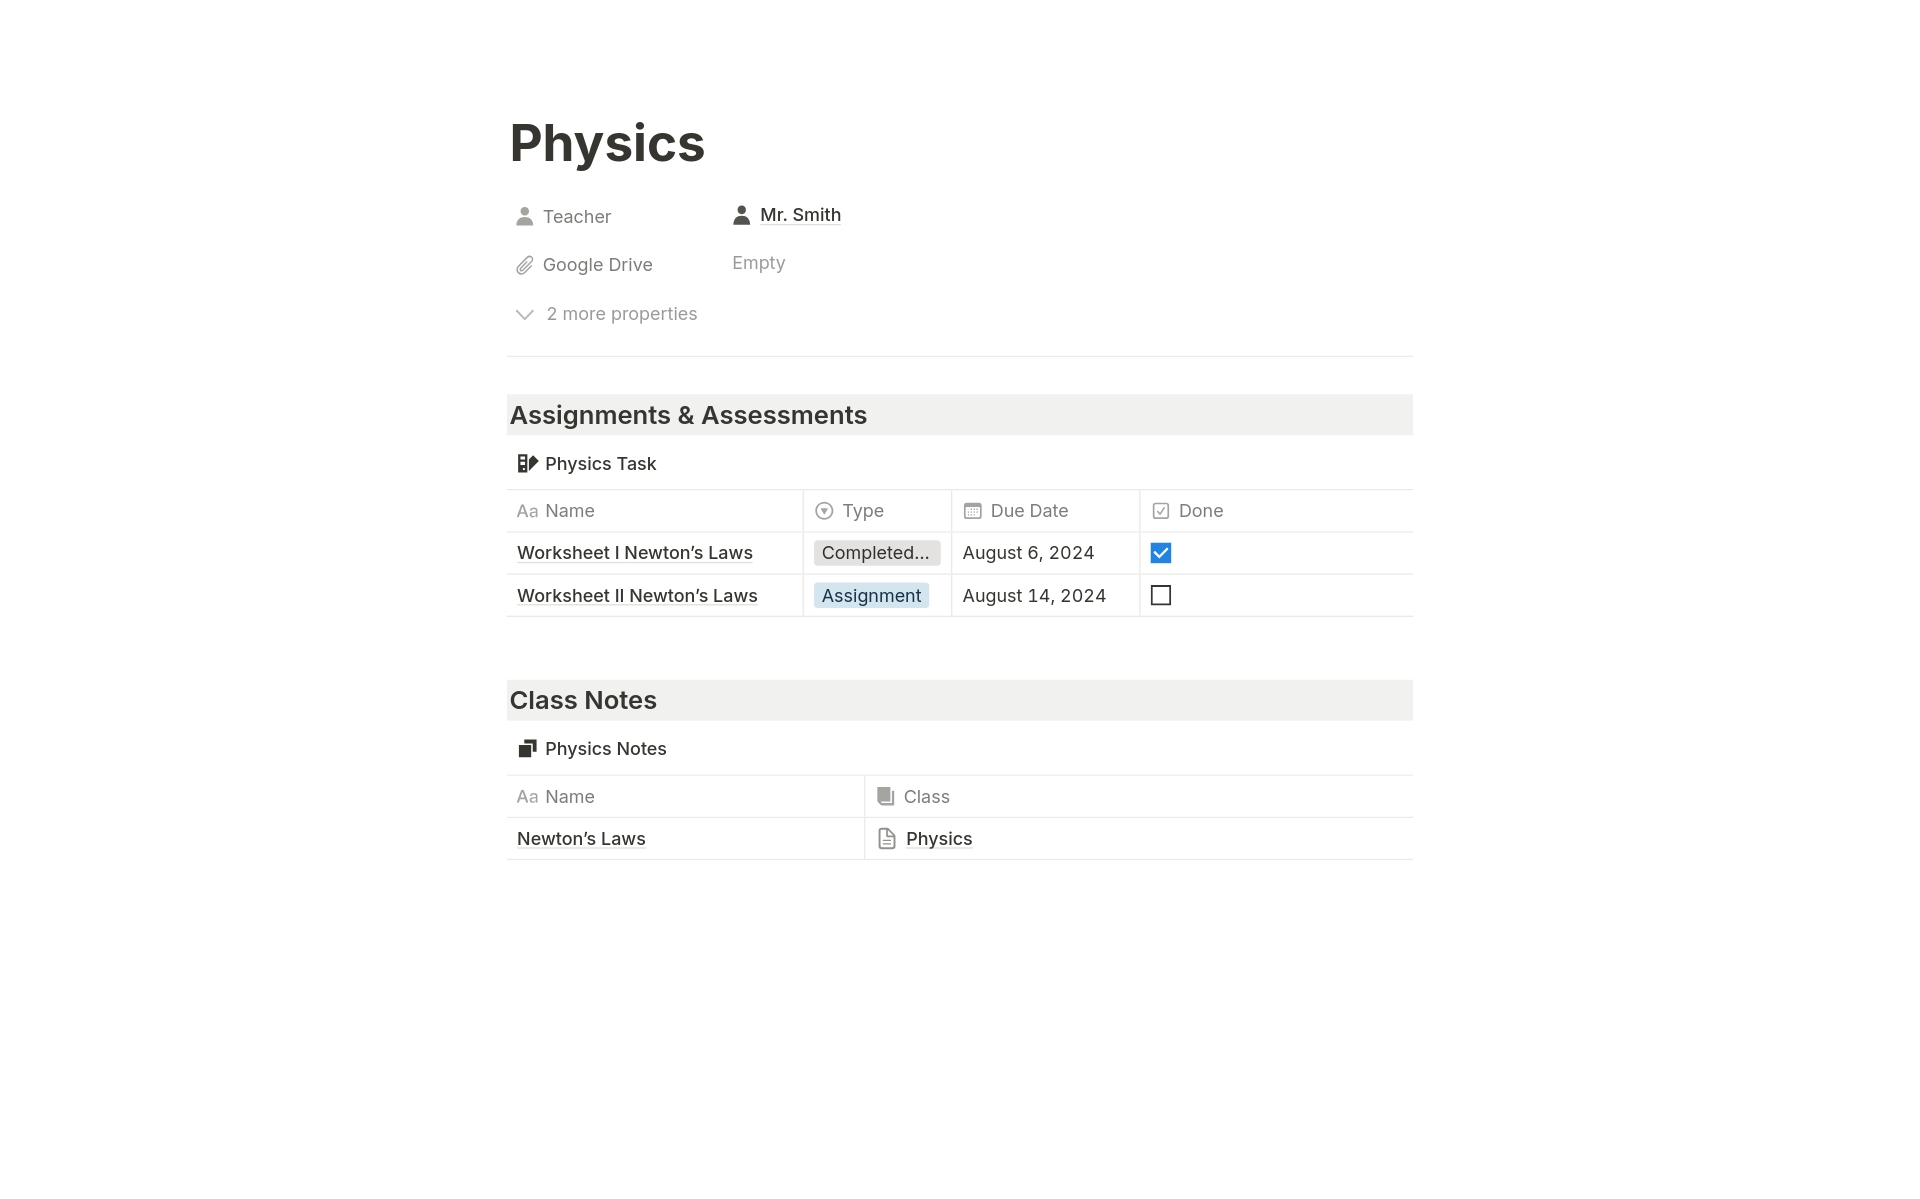 This is an academic dashboard designed for students who like to keep things simple but effective. It's a streamlined hub for managing assignments, exams, and deadlines without any unnecessary complexity. Stay on top of your academic game and keep things organized.